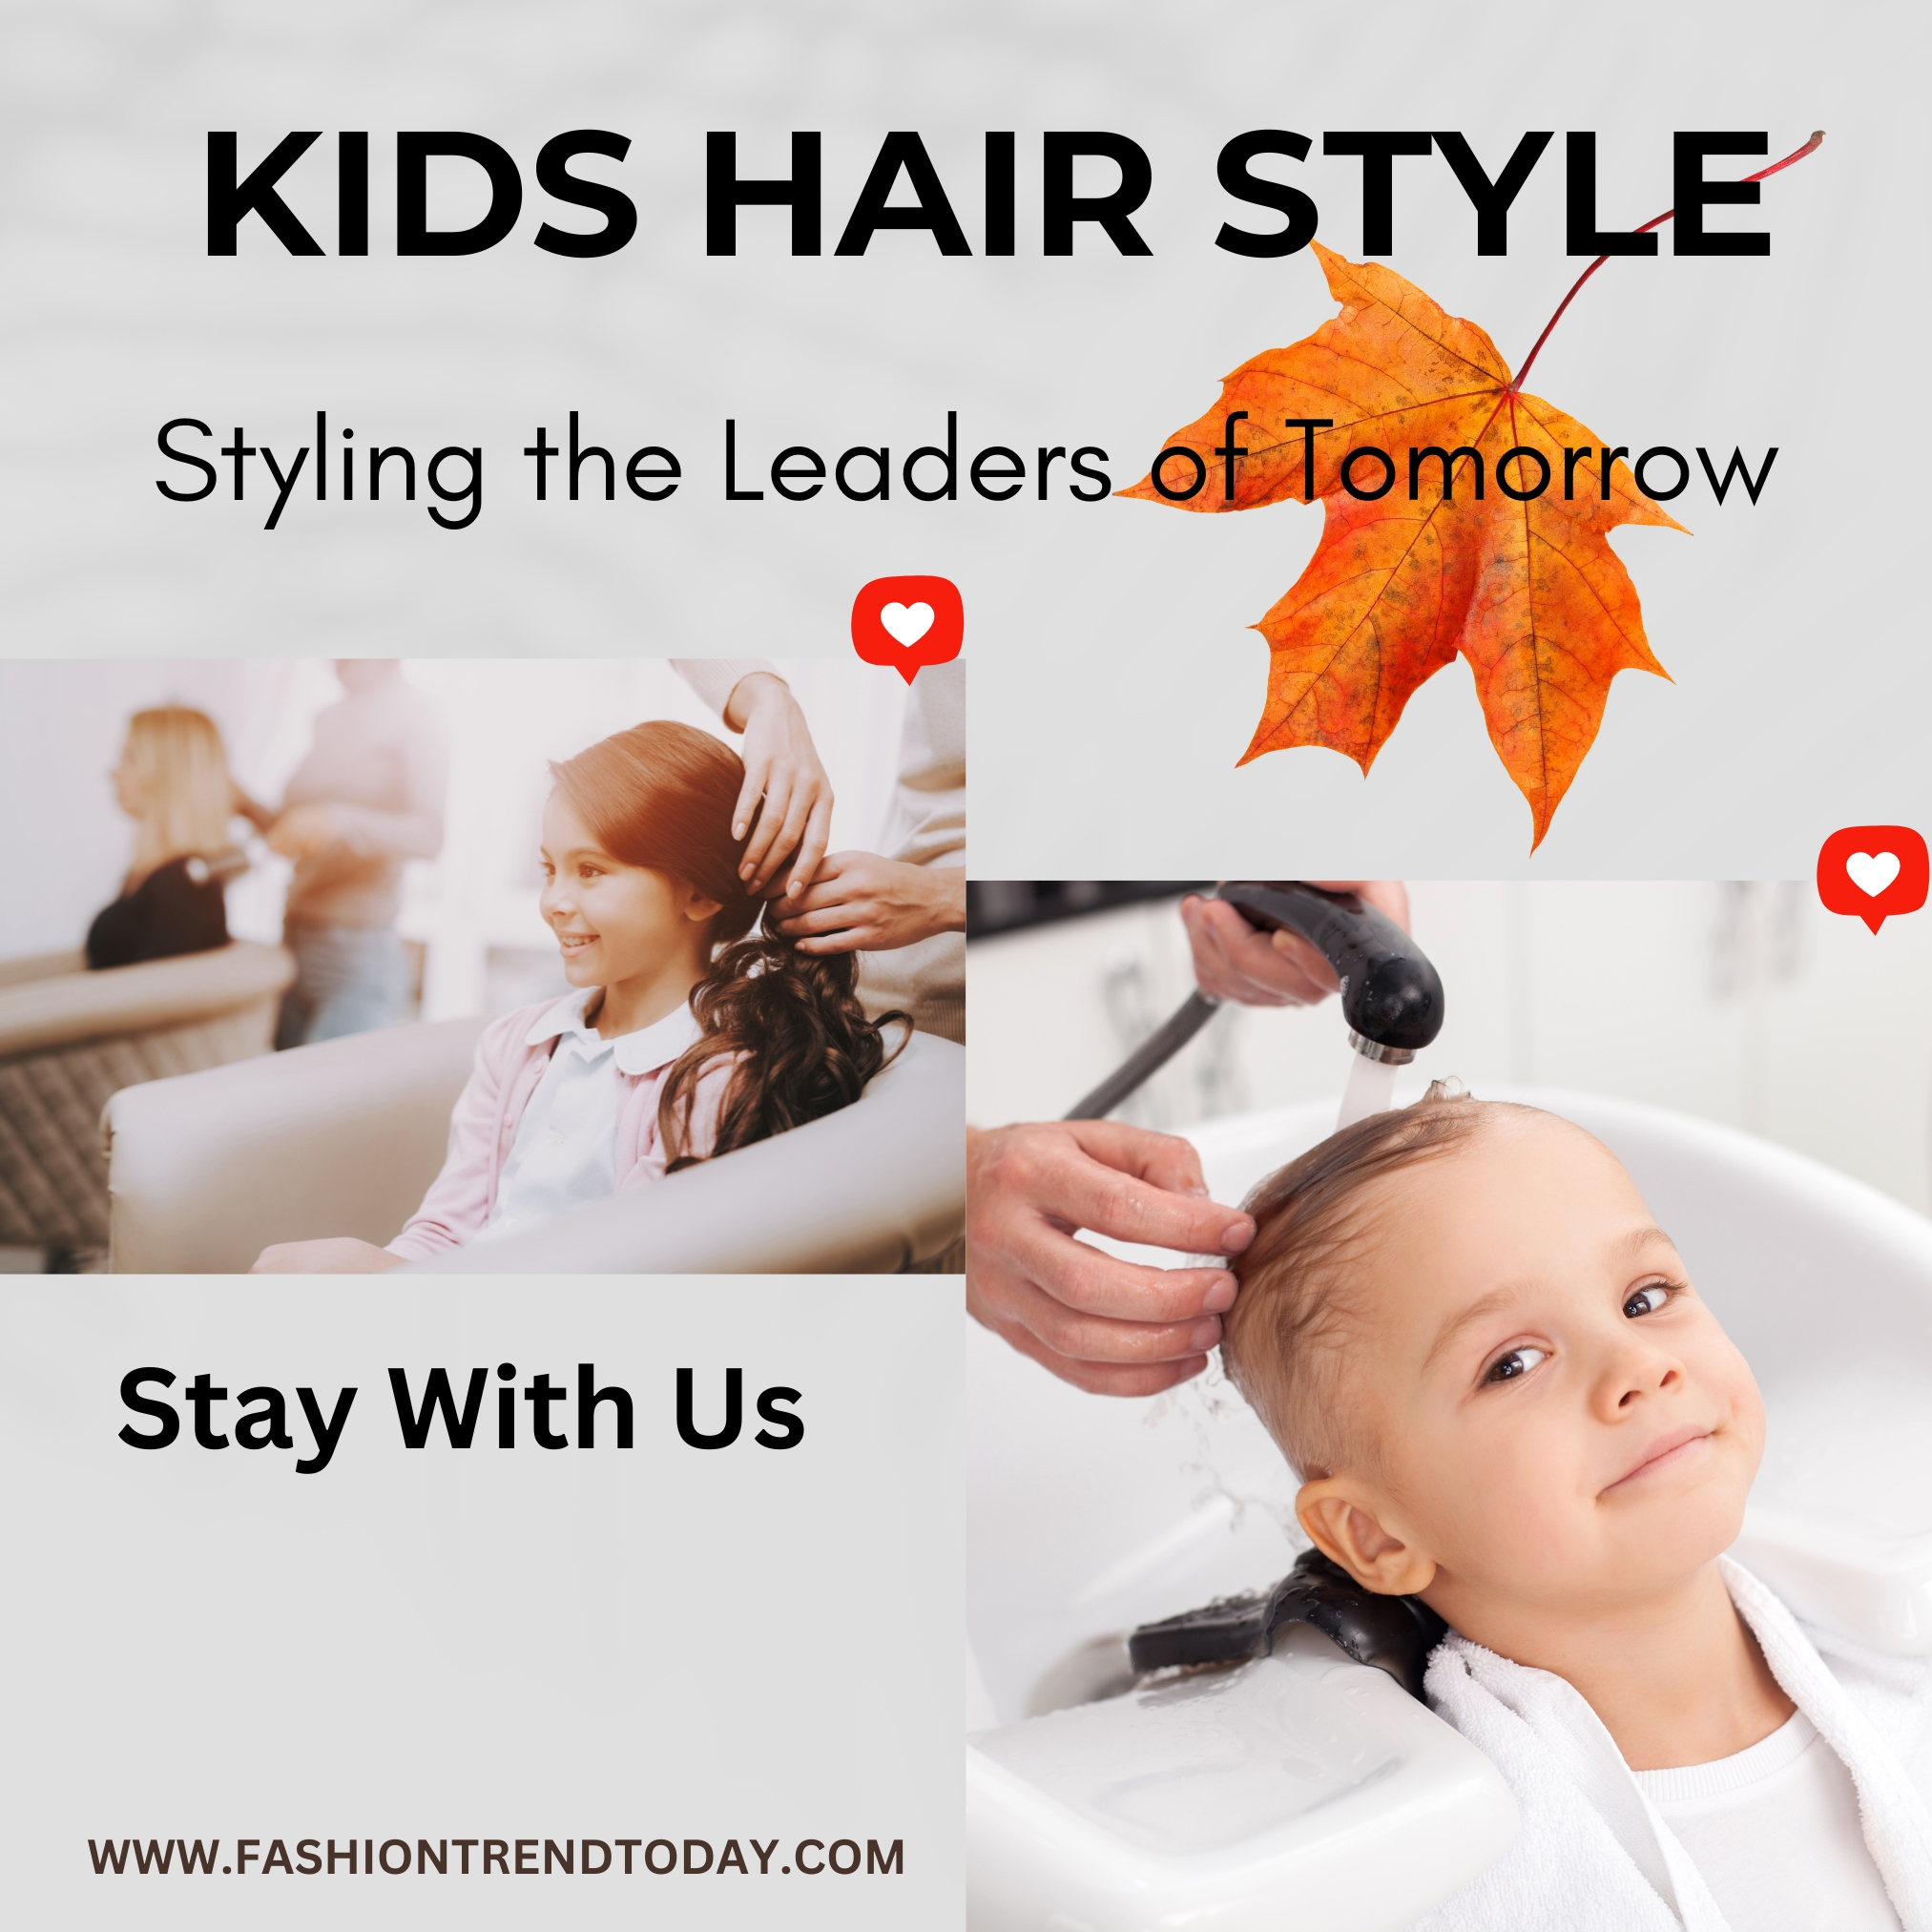 Kids Hair Style: Styling the Leaders of Tomorrow